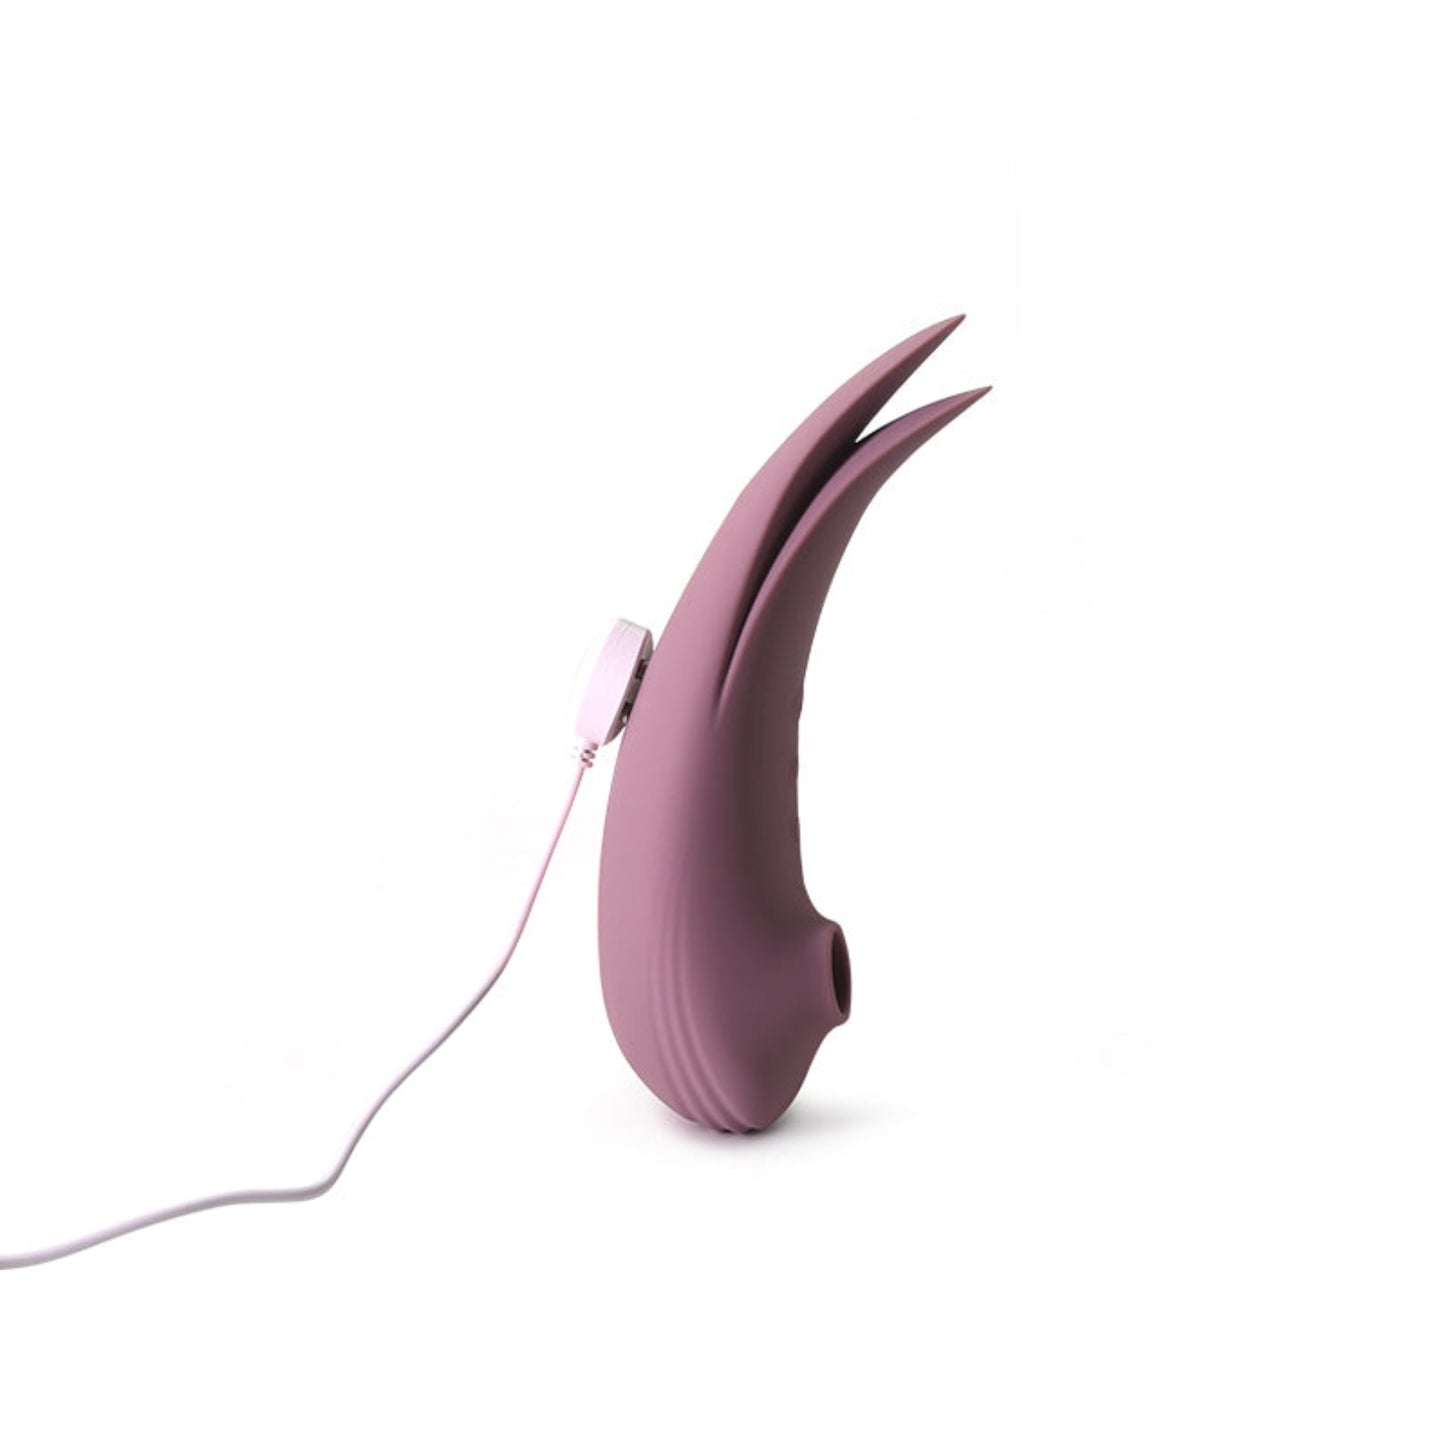 Dual action suction an vibrator toy with curved body and fin-like tail in dusty rose colour, standing upright with charger attached